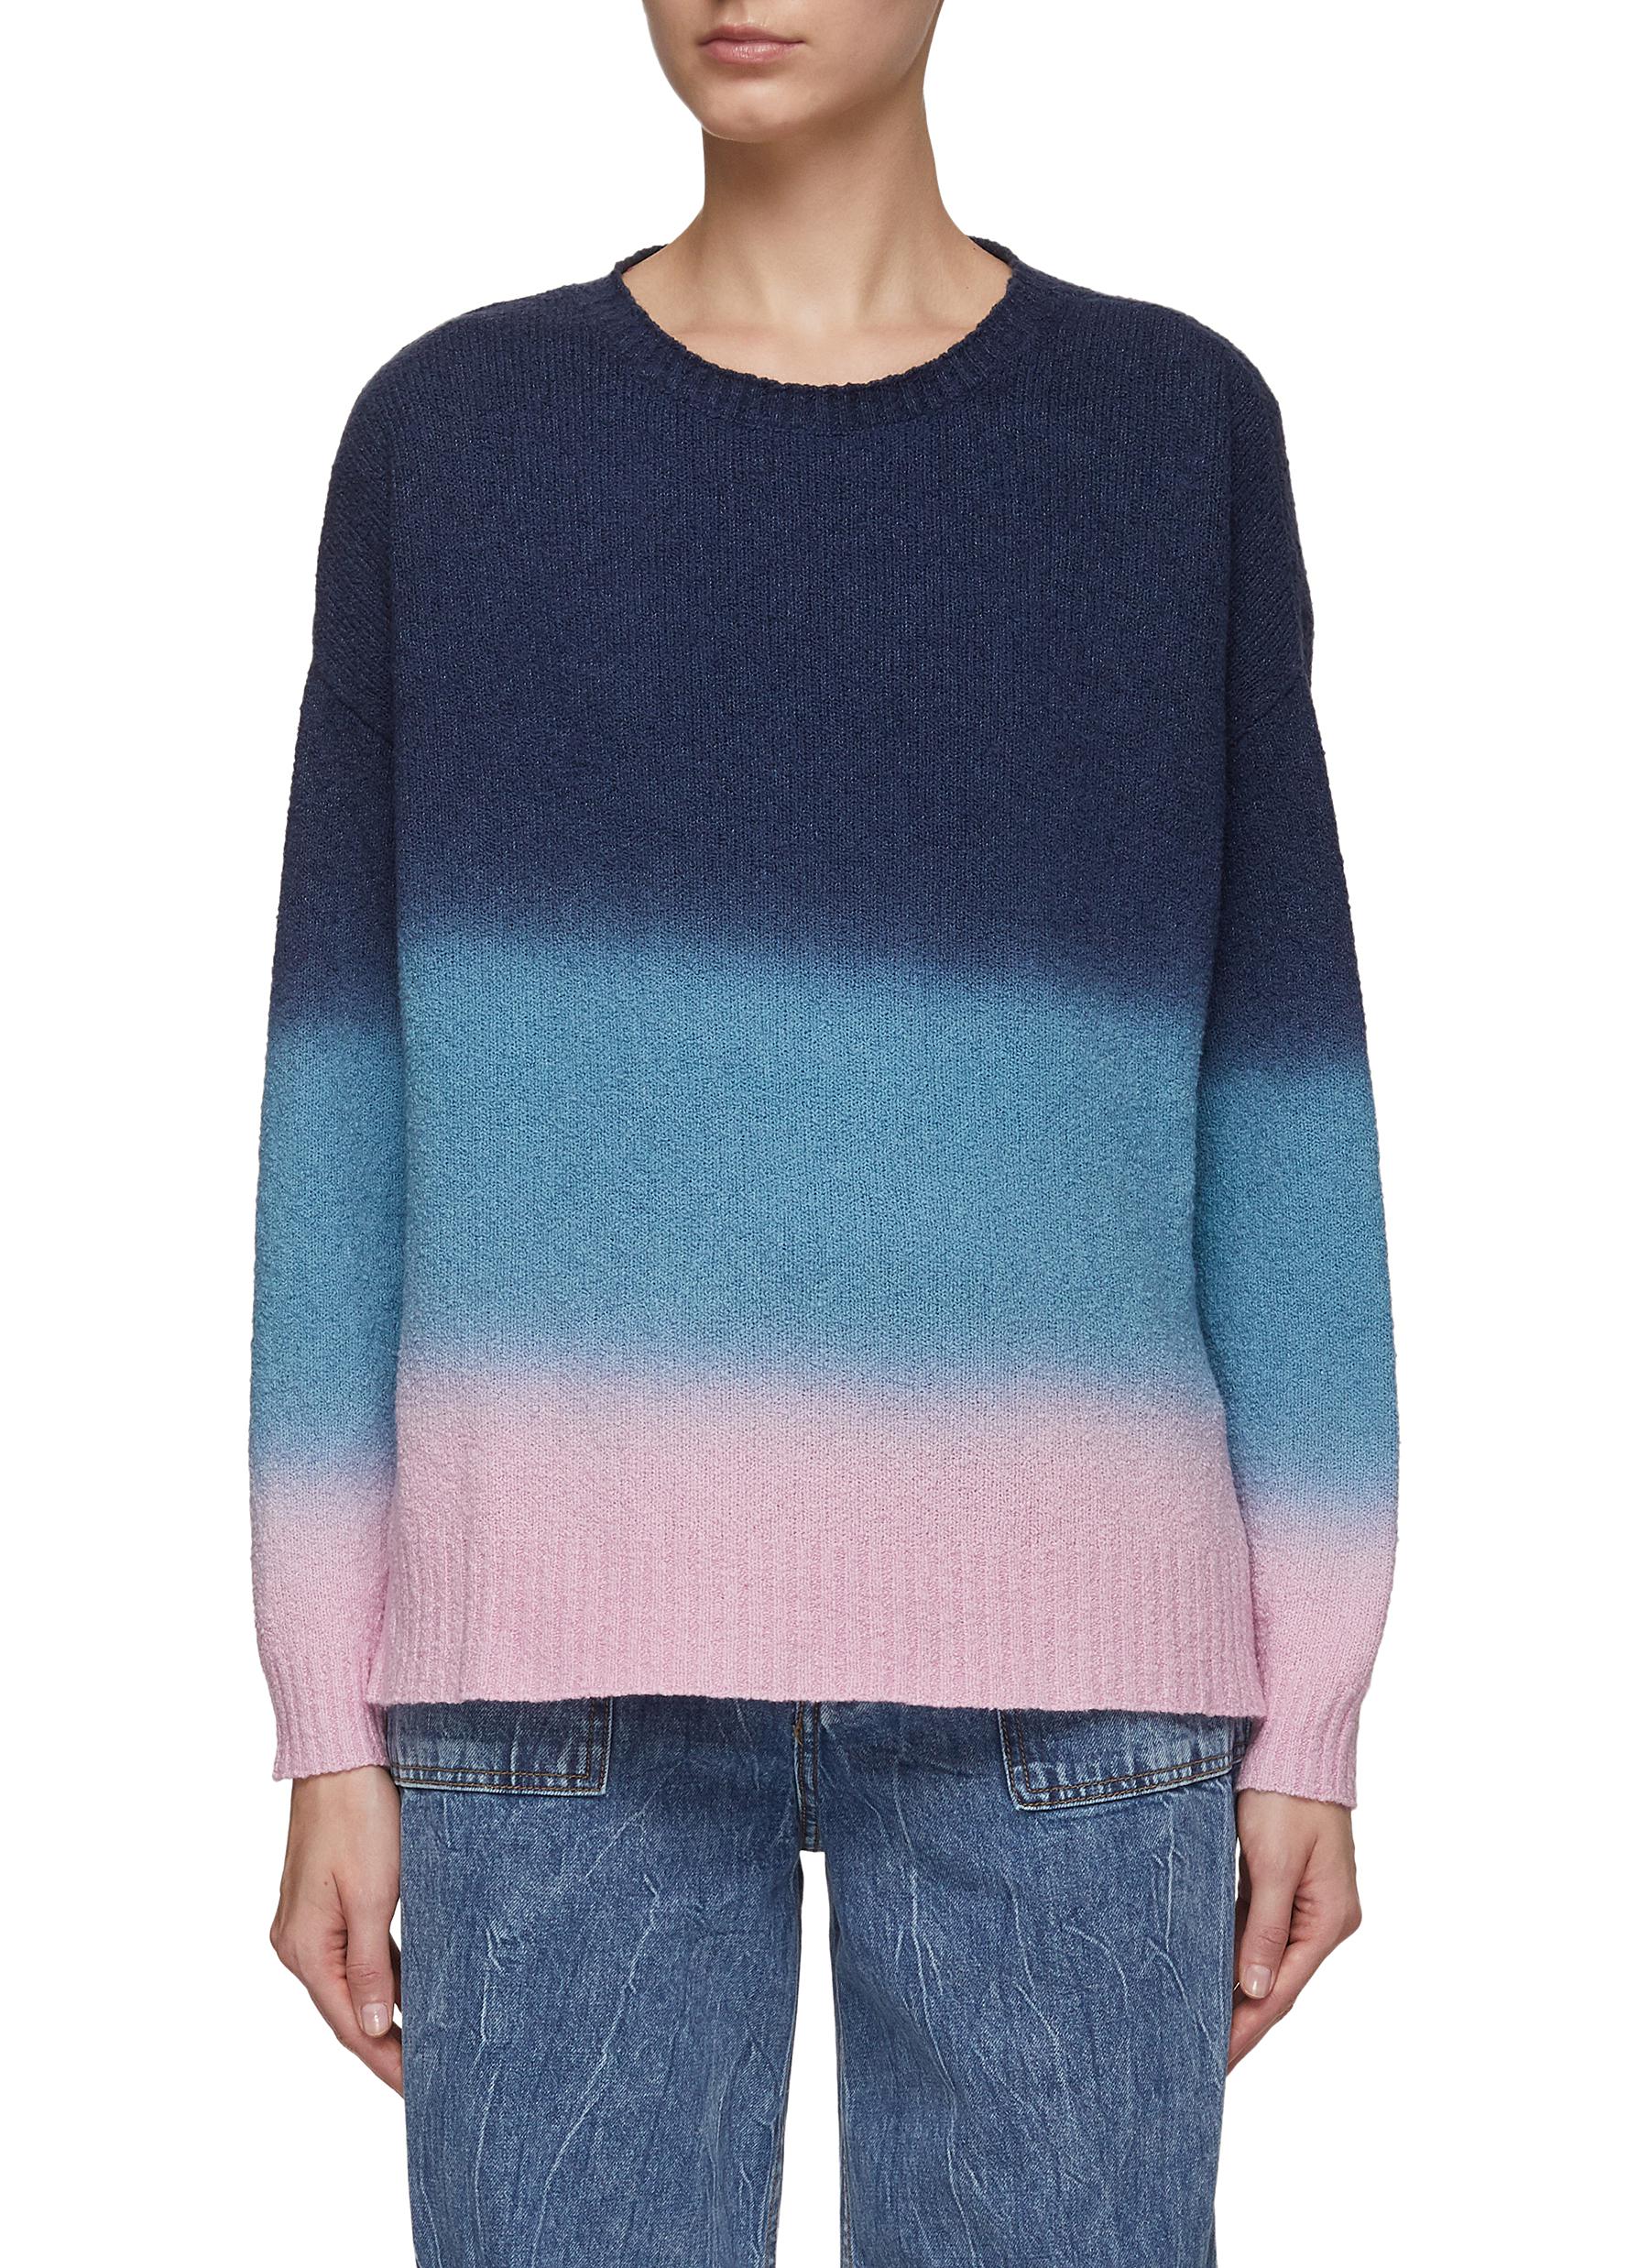 ELECTRIC & ROSE ‘Lilith' Sunset Colourblock Cotton Blend Knit Sweater